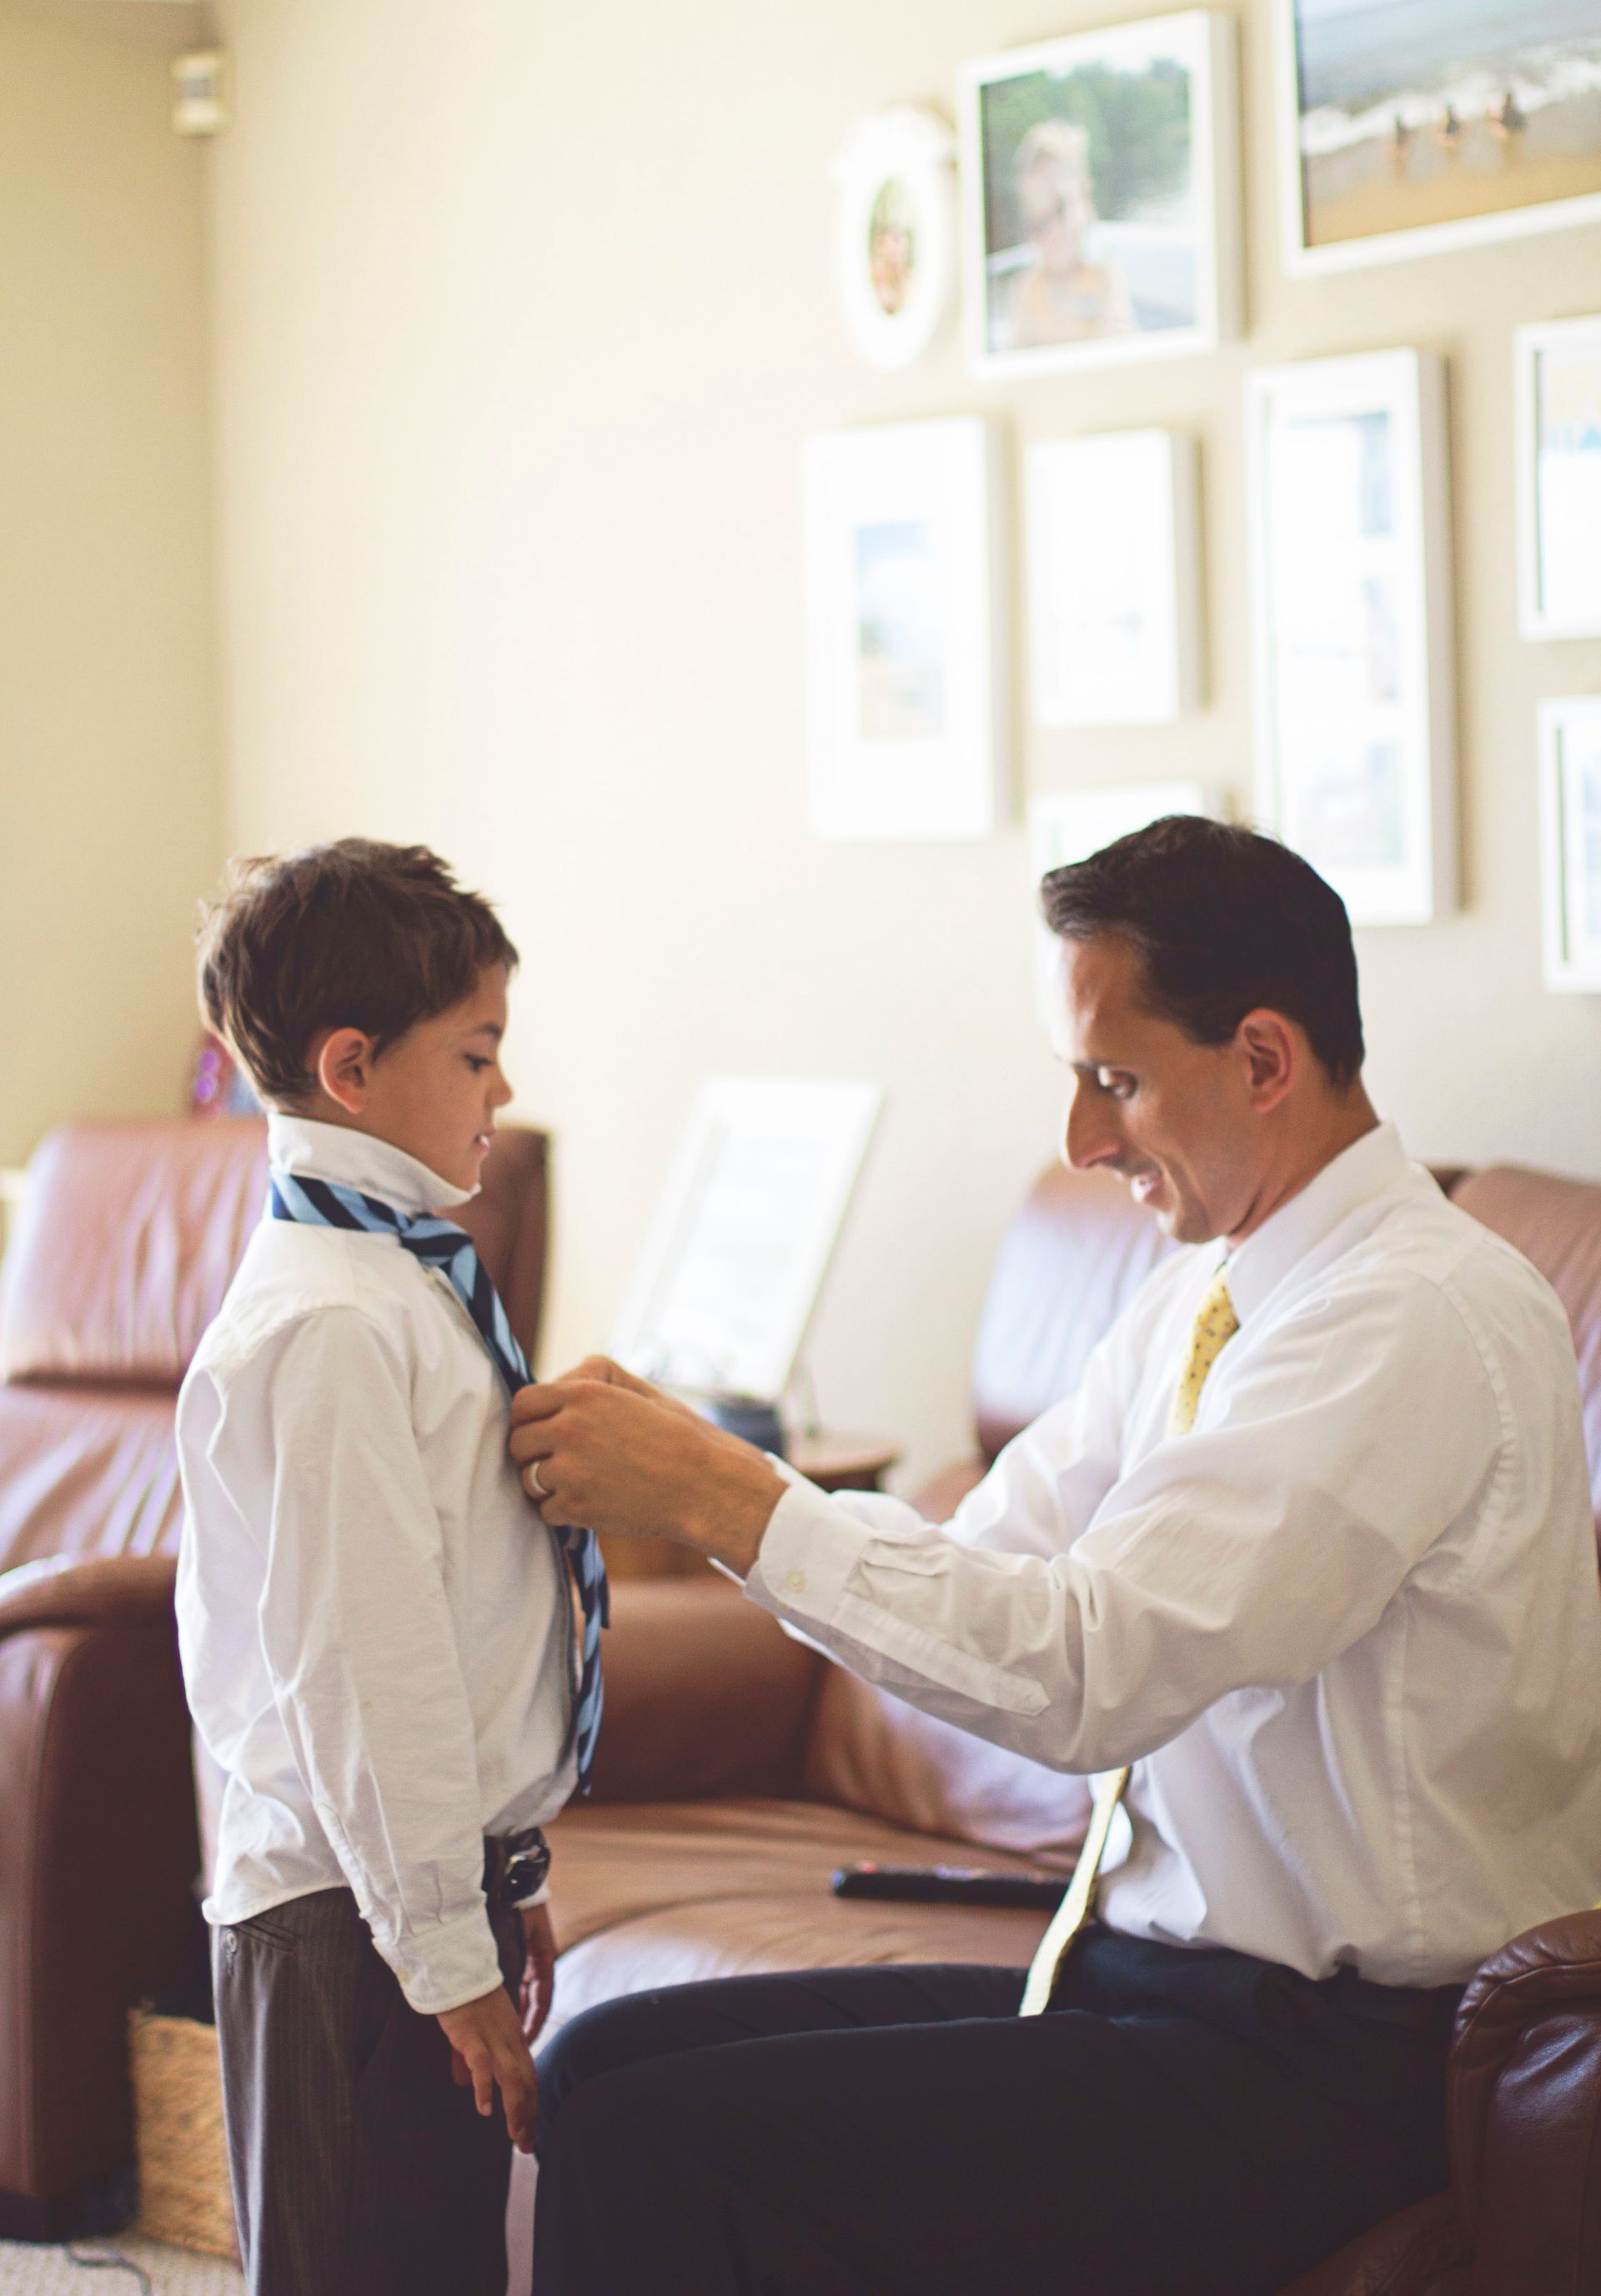 A father teaches his son how to tie a tie.